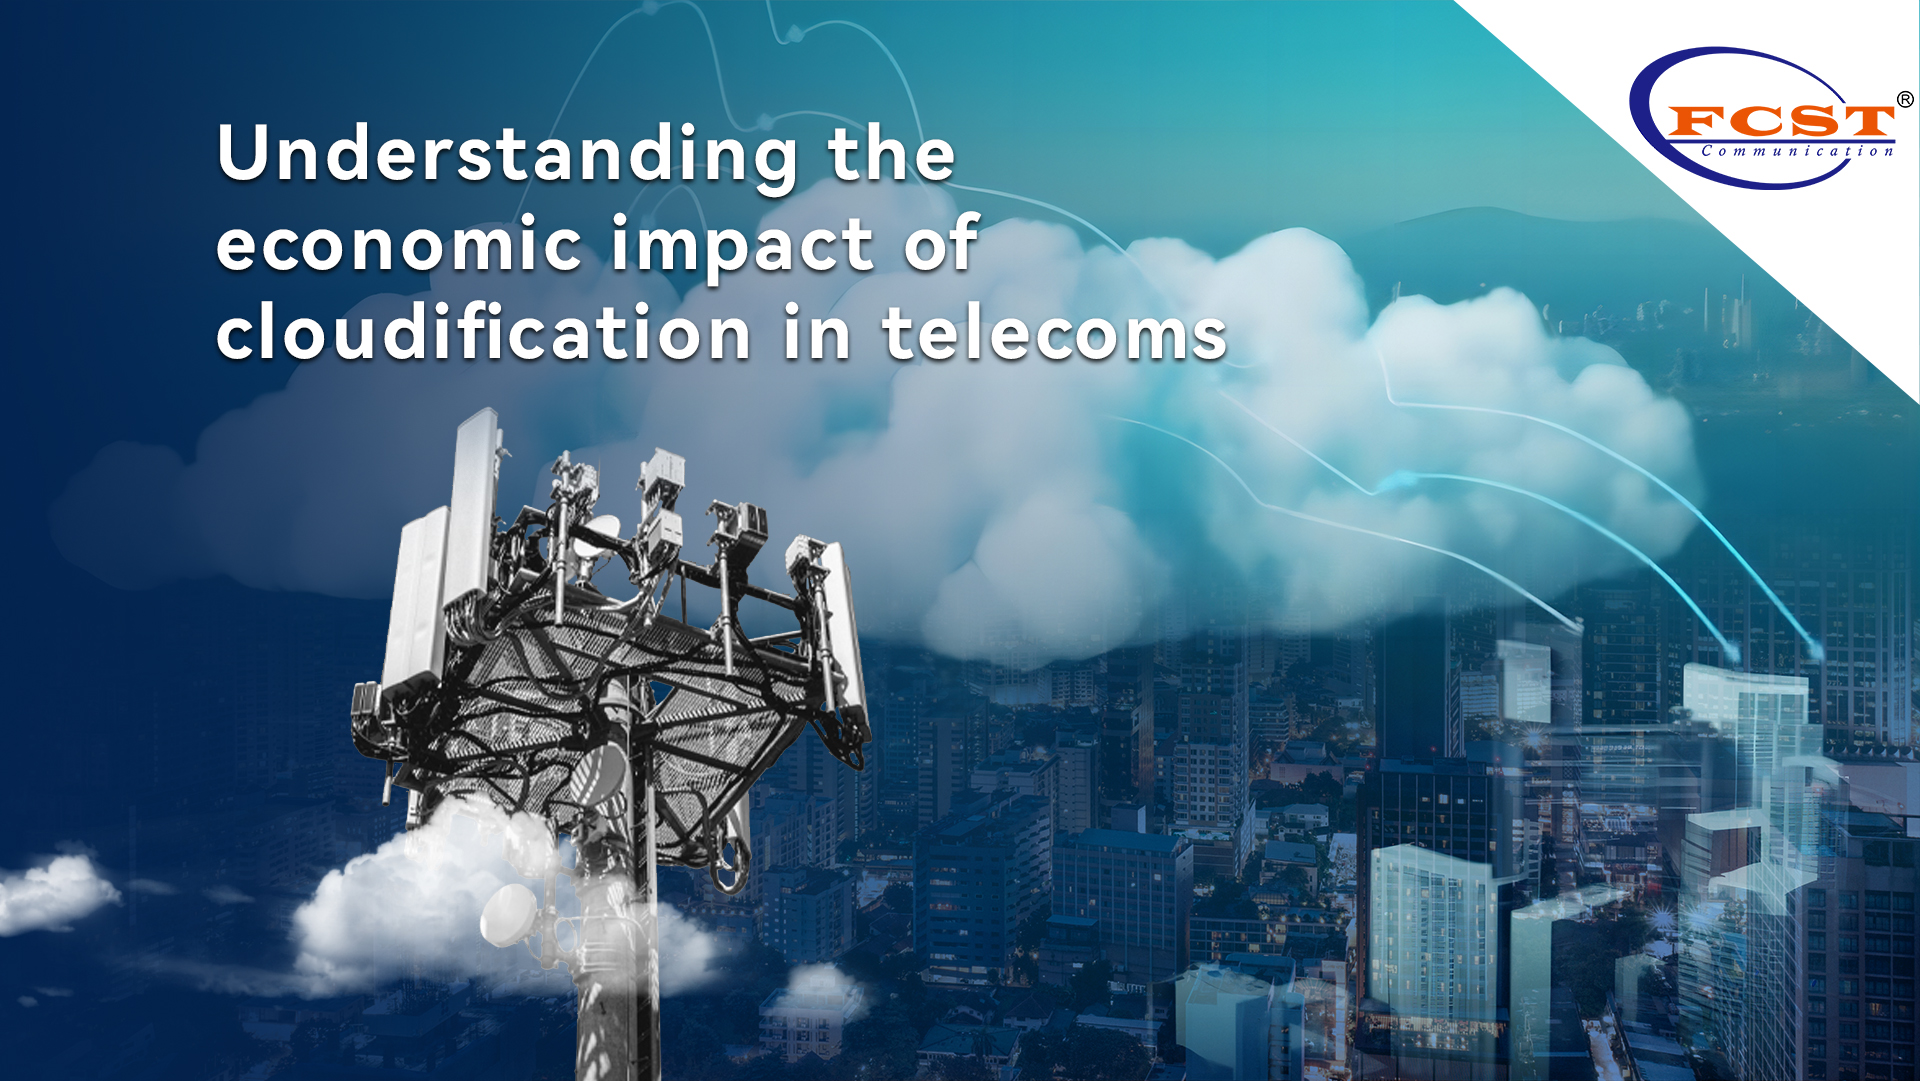 Understanding the economic impact of cloudification in telecoms